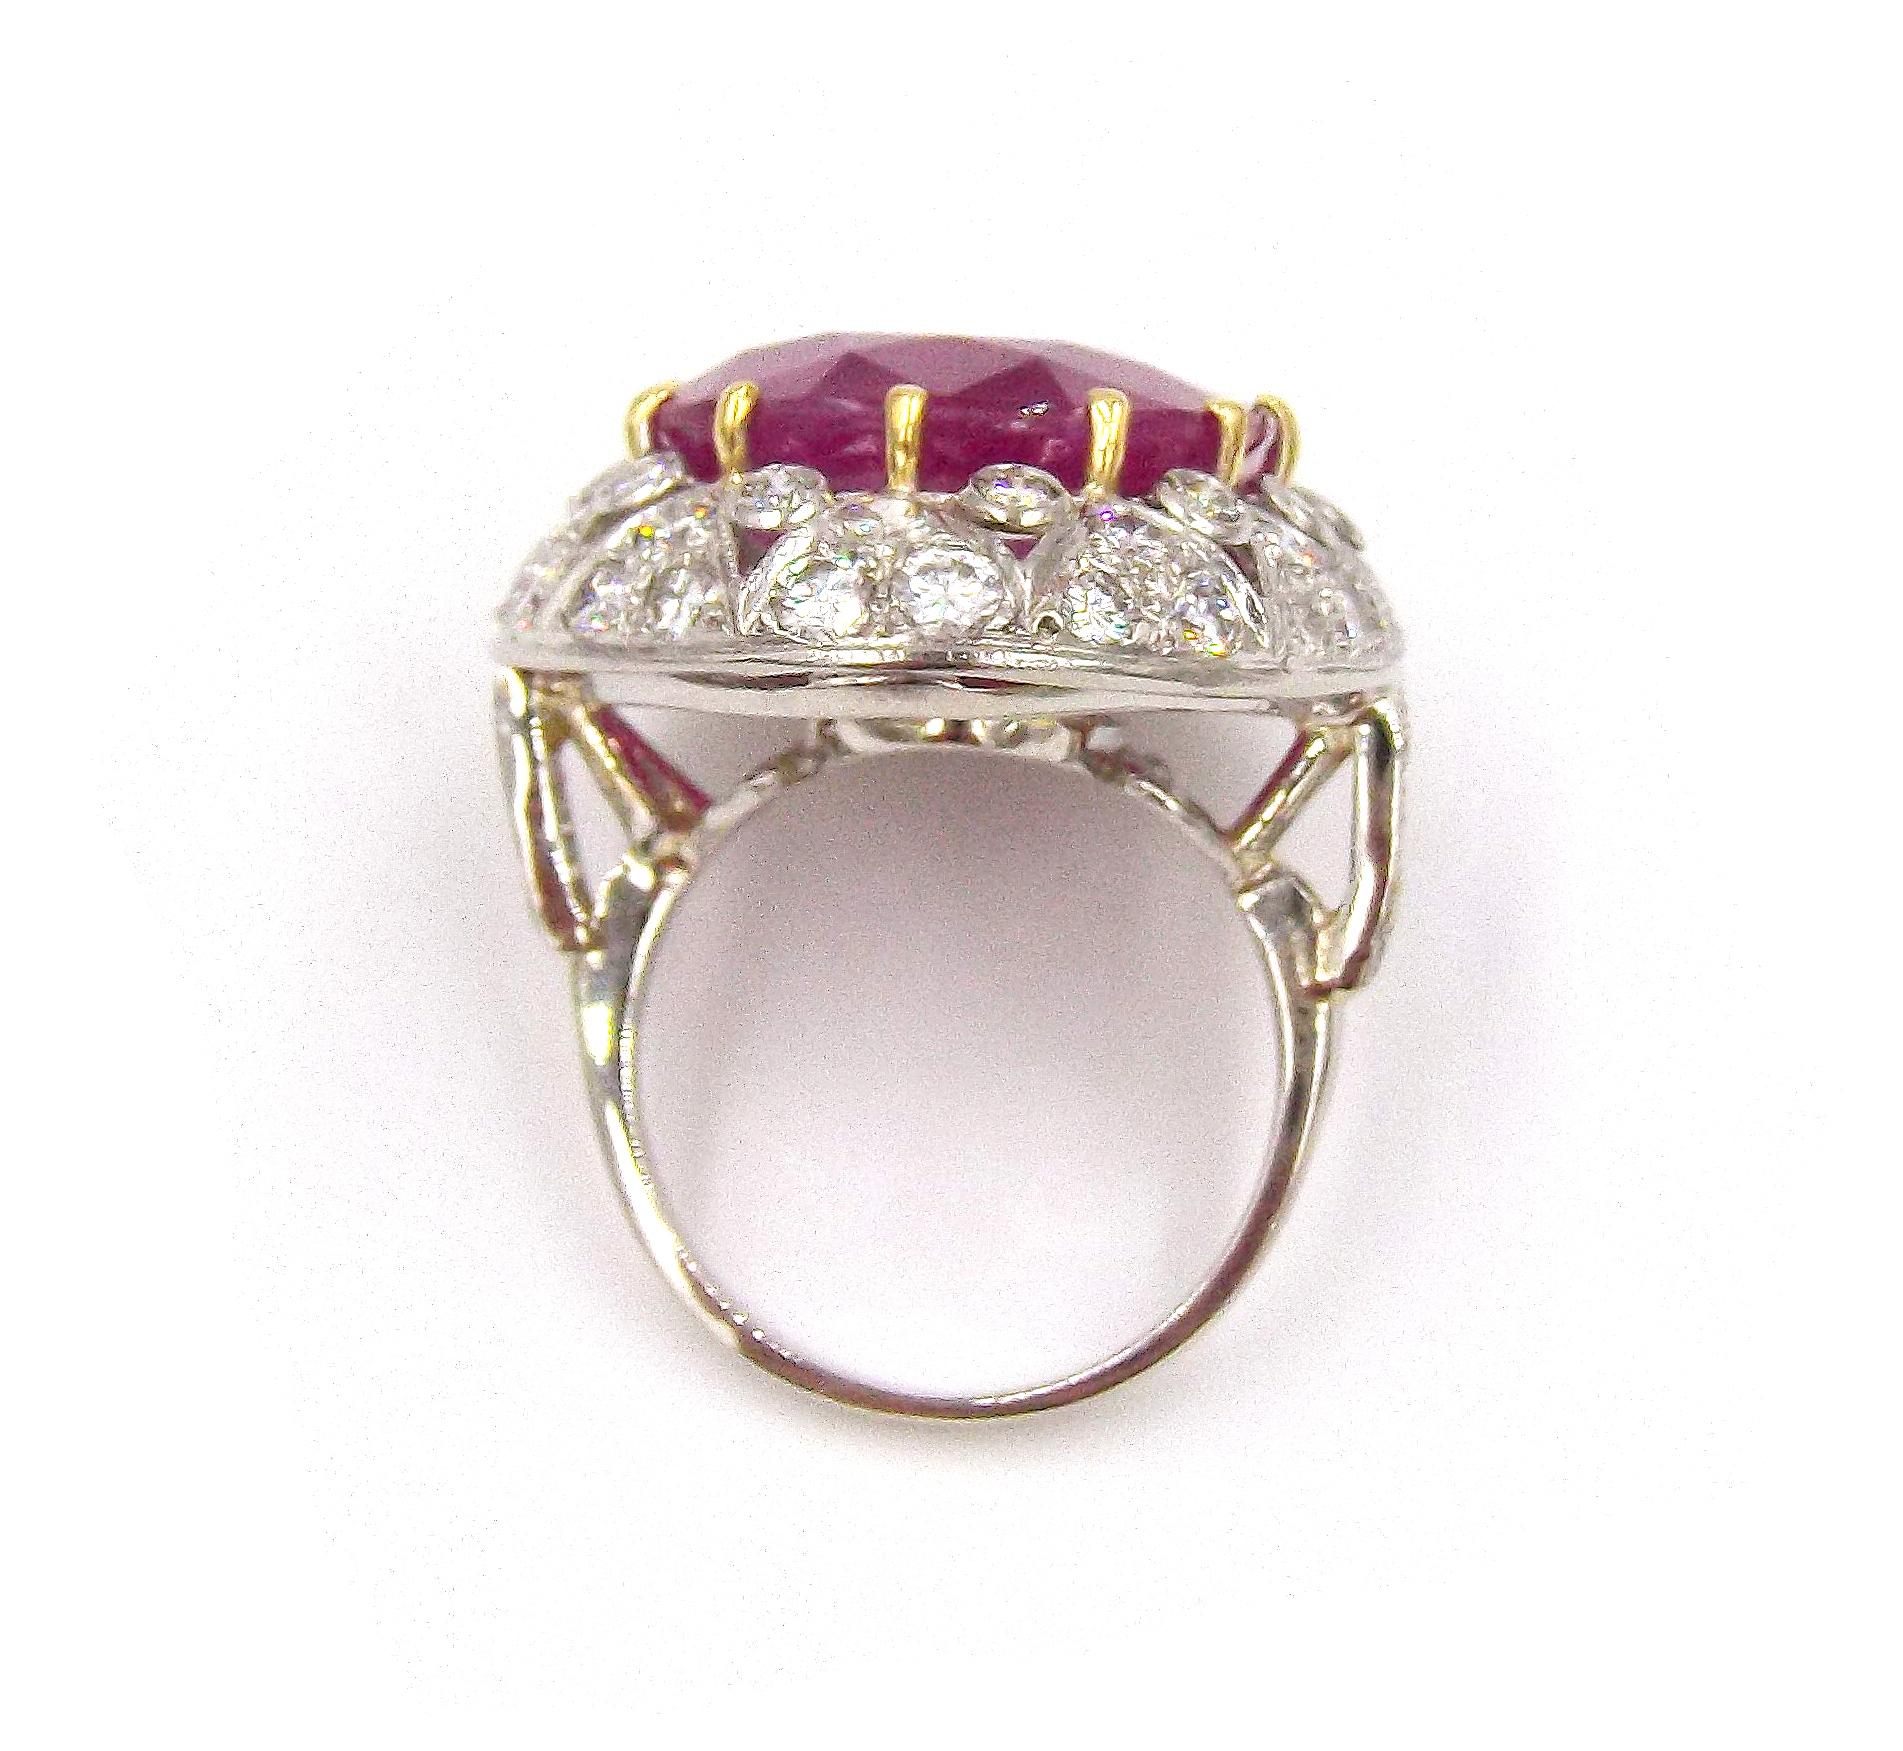 25.16ct Burma Ruby Diamond Platinum Ring SZ 6.25 AGL Certificate In Good Condition For Sale In New York, NY